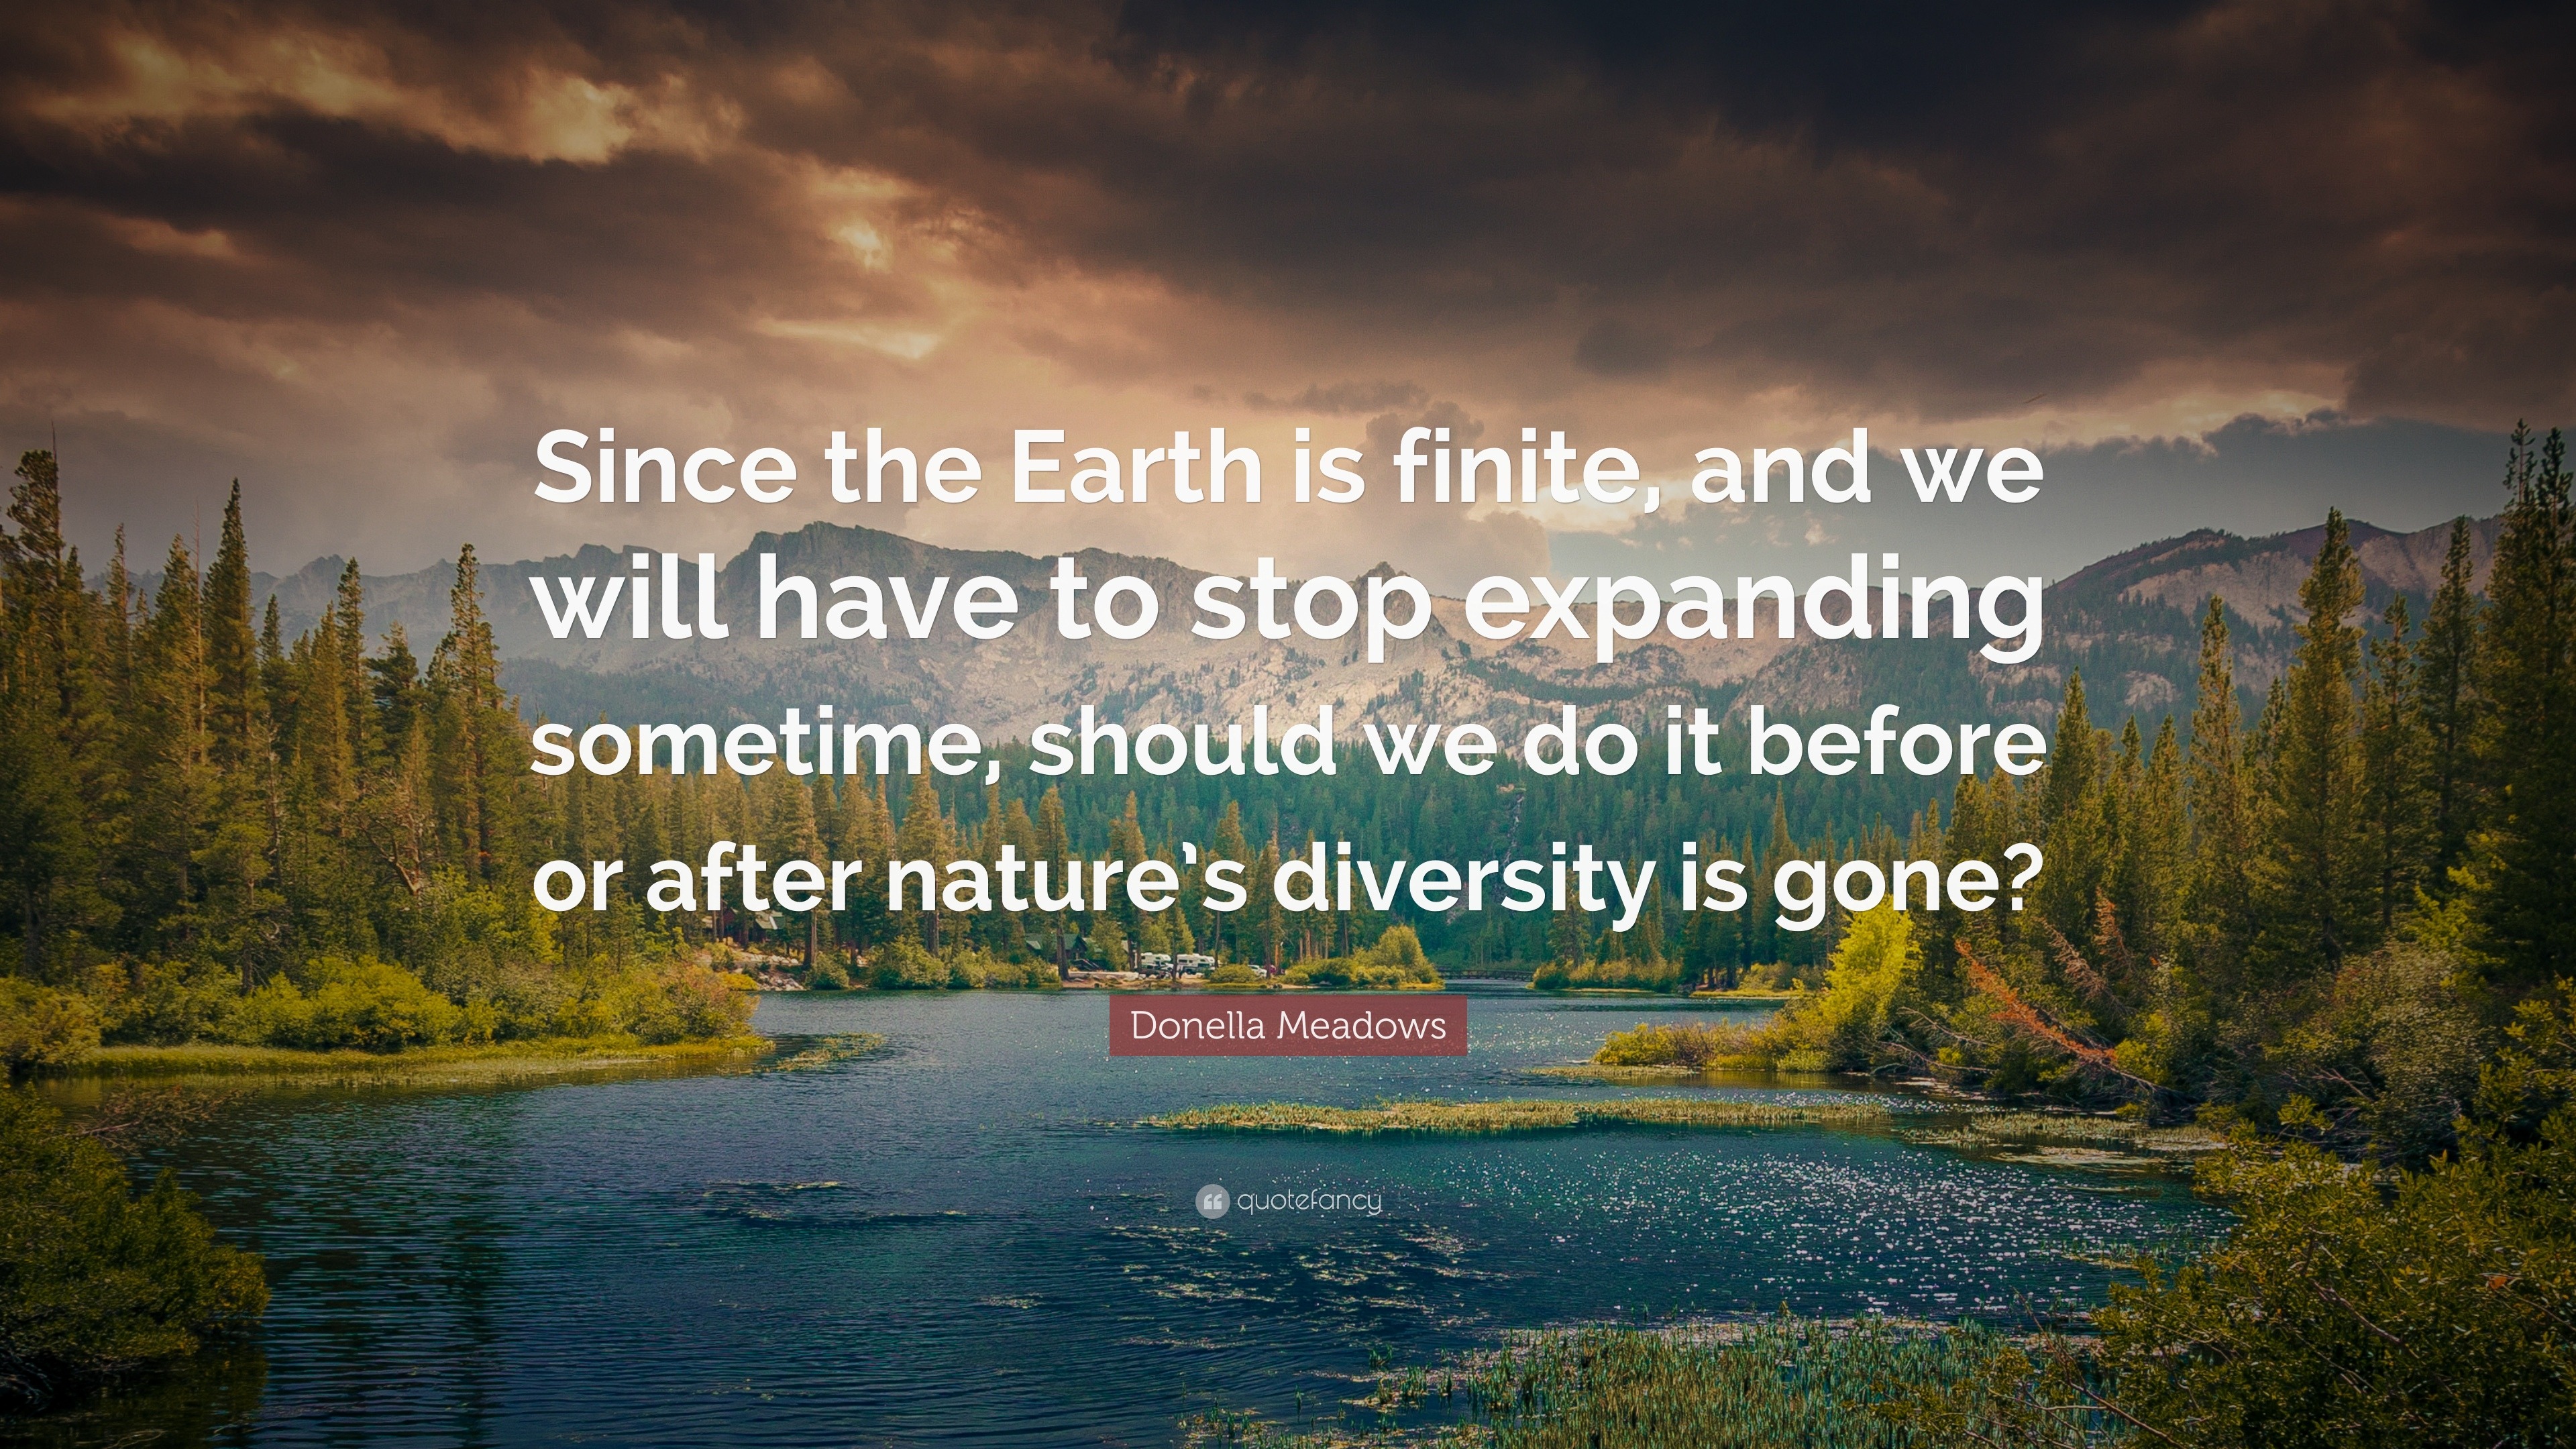 Donella Meadows Quote: “Since the Earth is finite, and we will have to ...